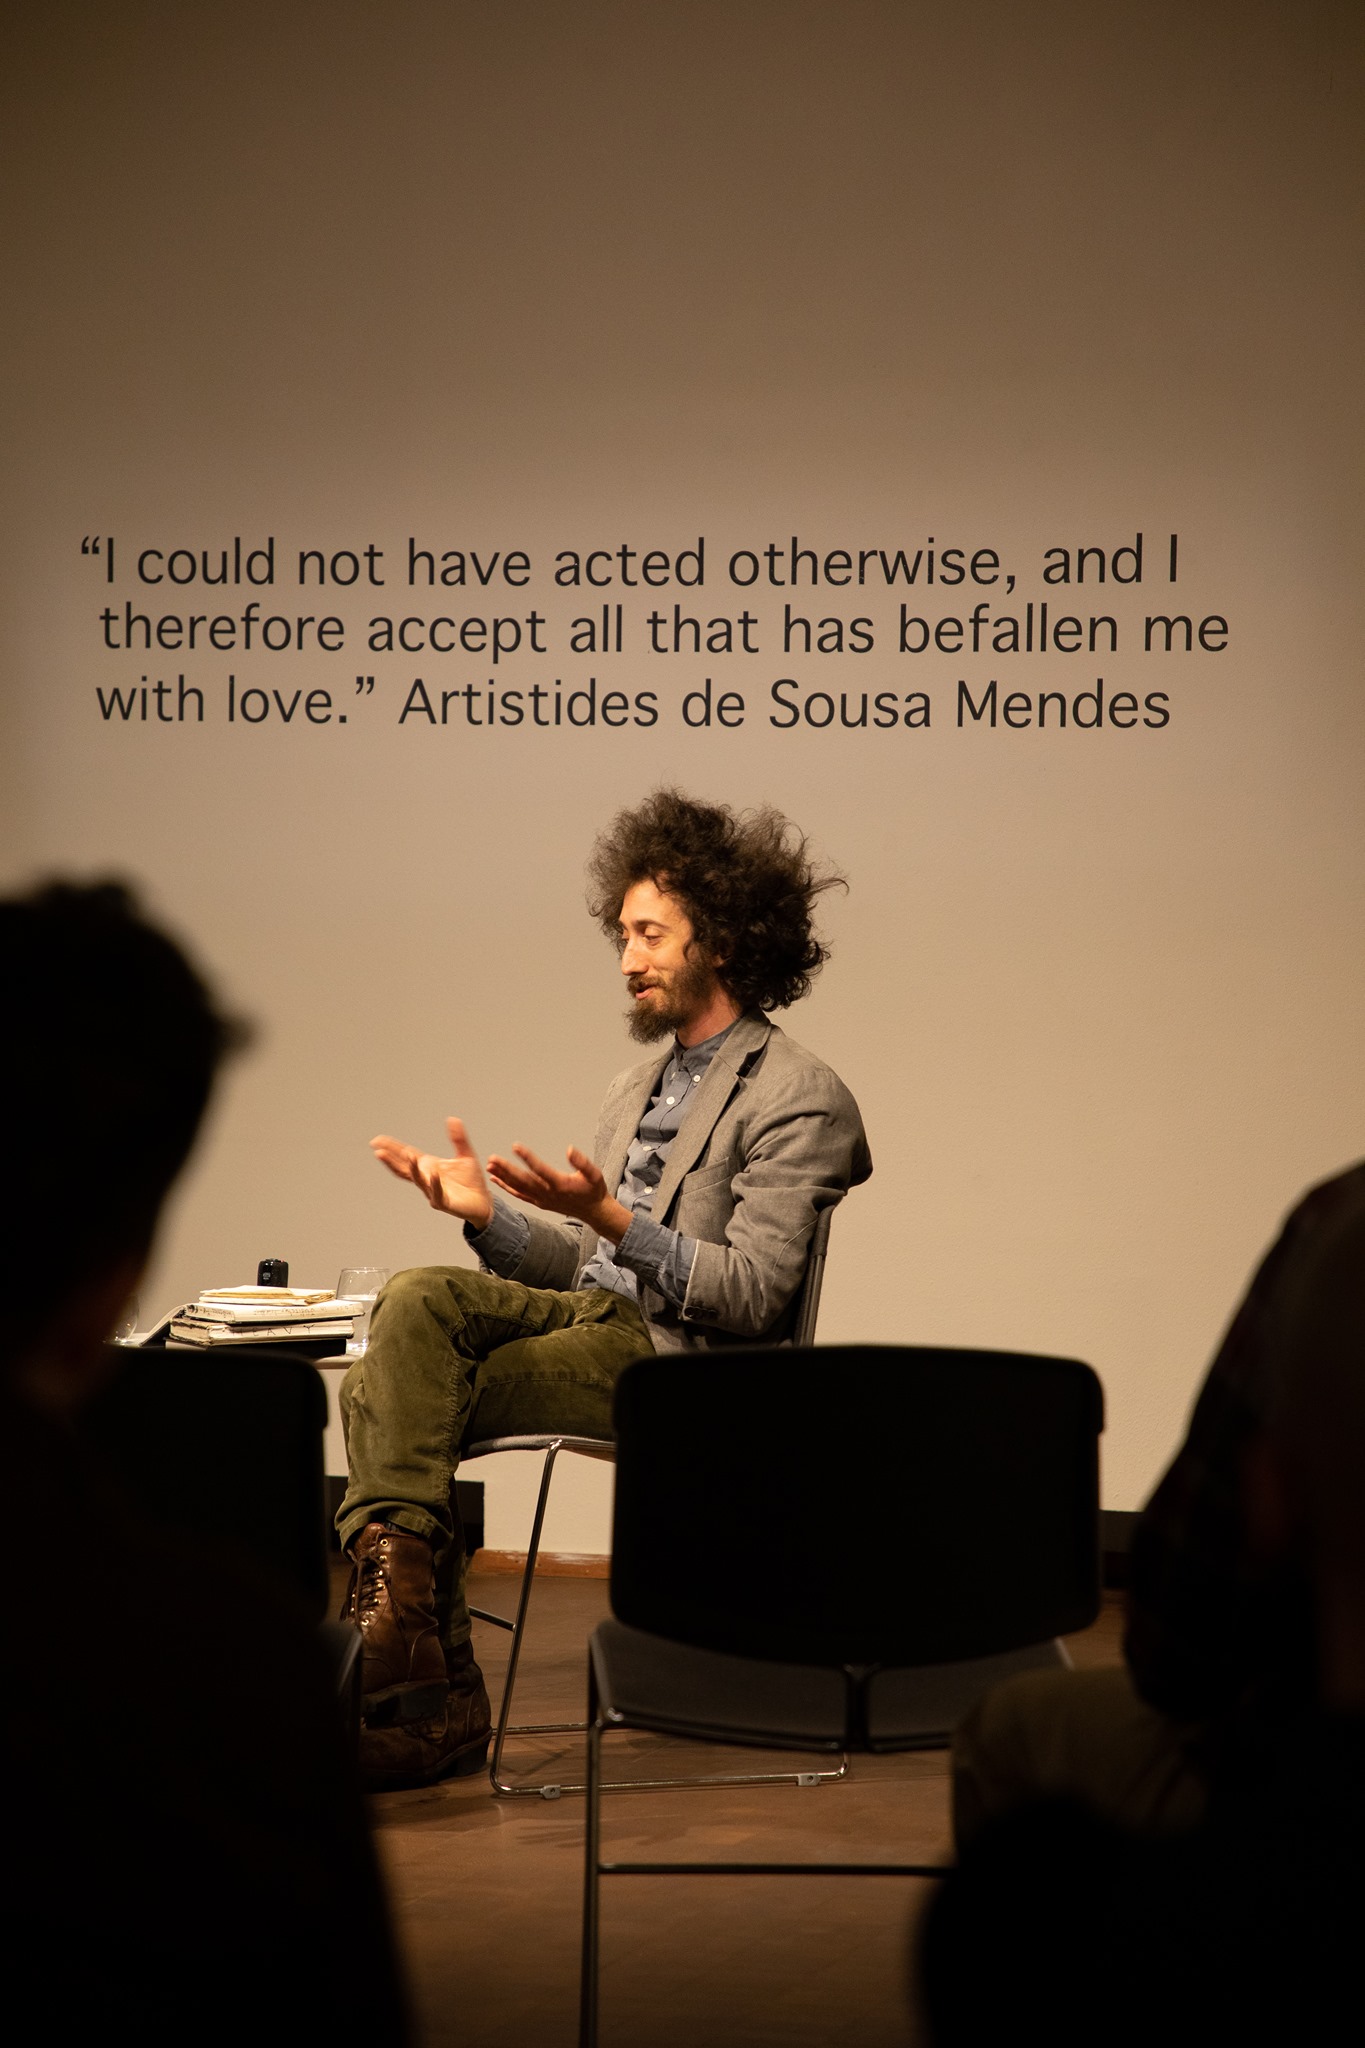 An artist shares their thoughts with a small audience in a gallery setting